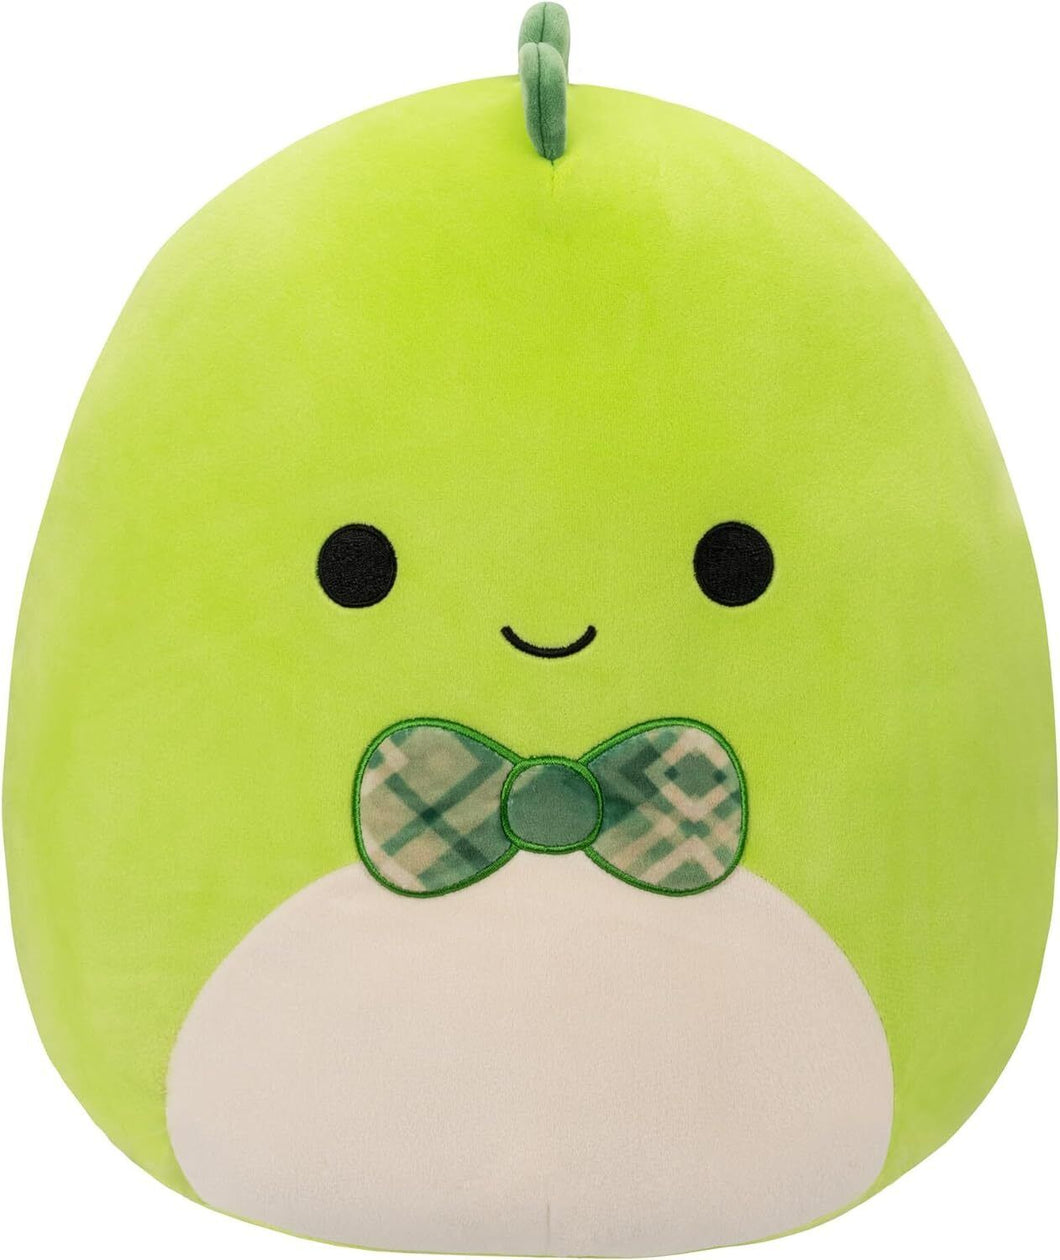 Squishmallows Danny the Green Dino Wearing a Bow Tie 8